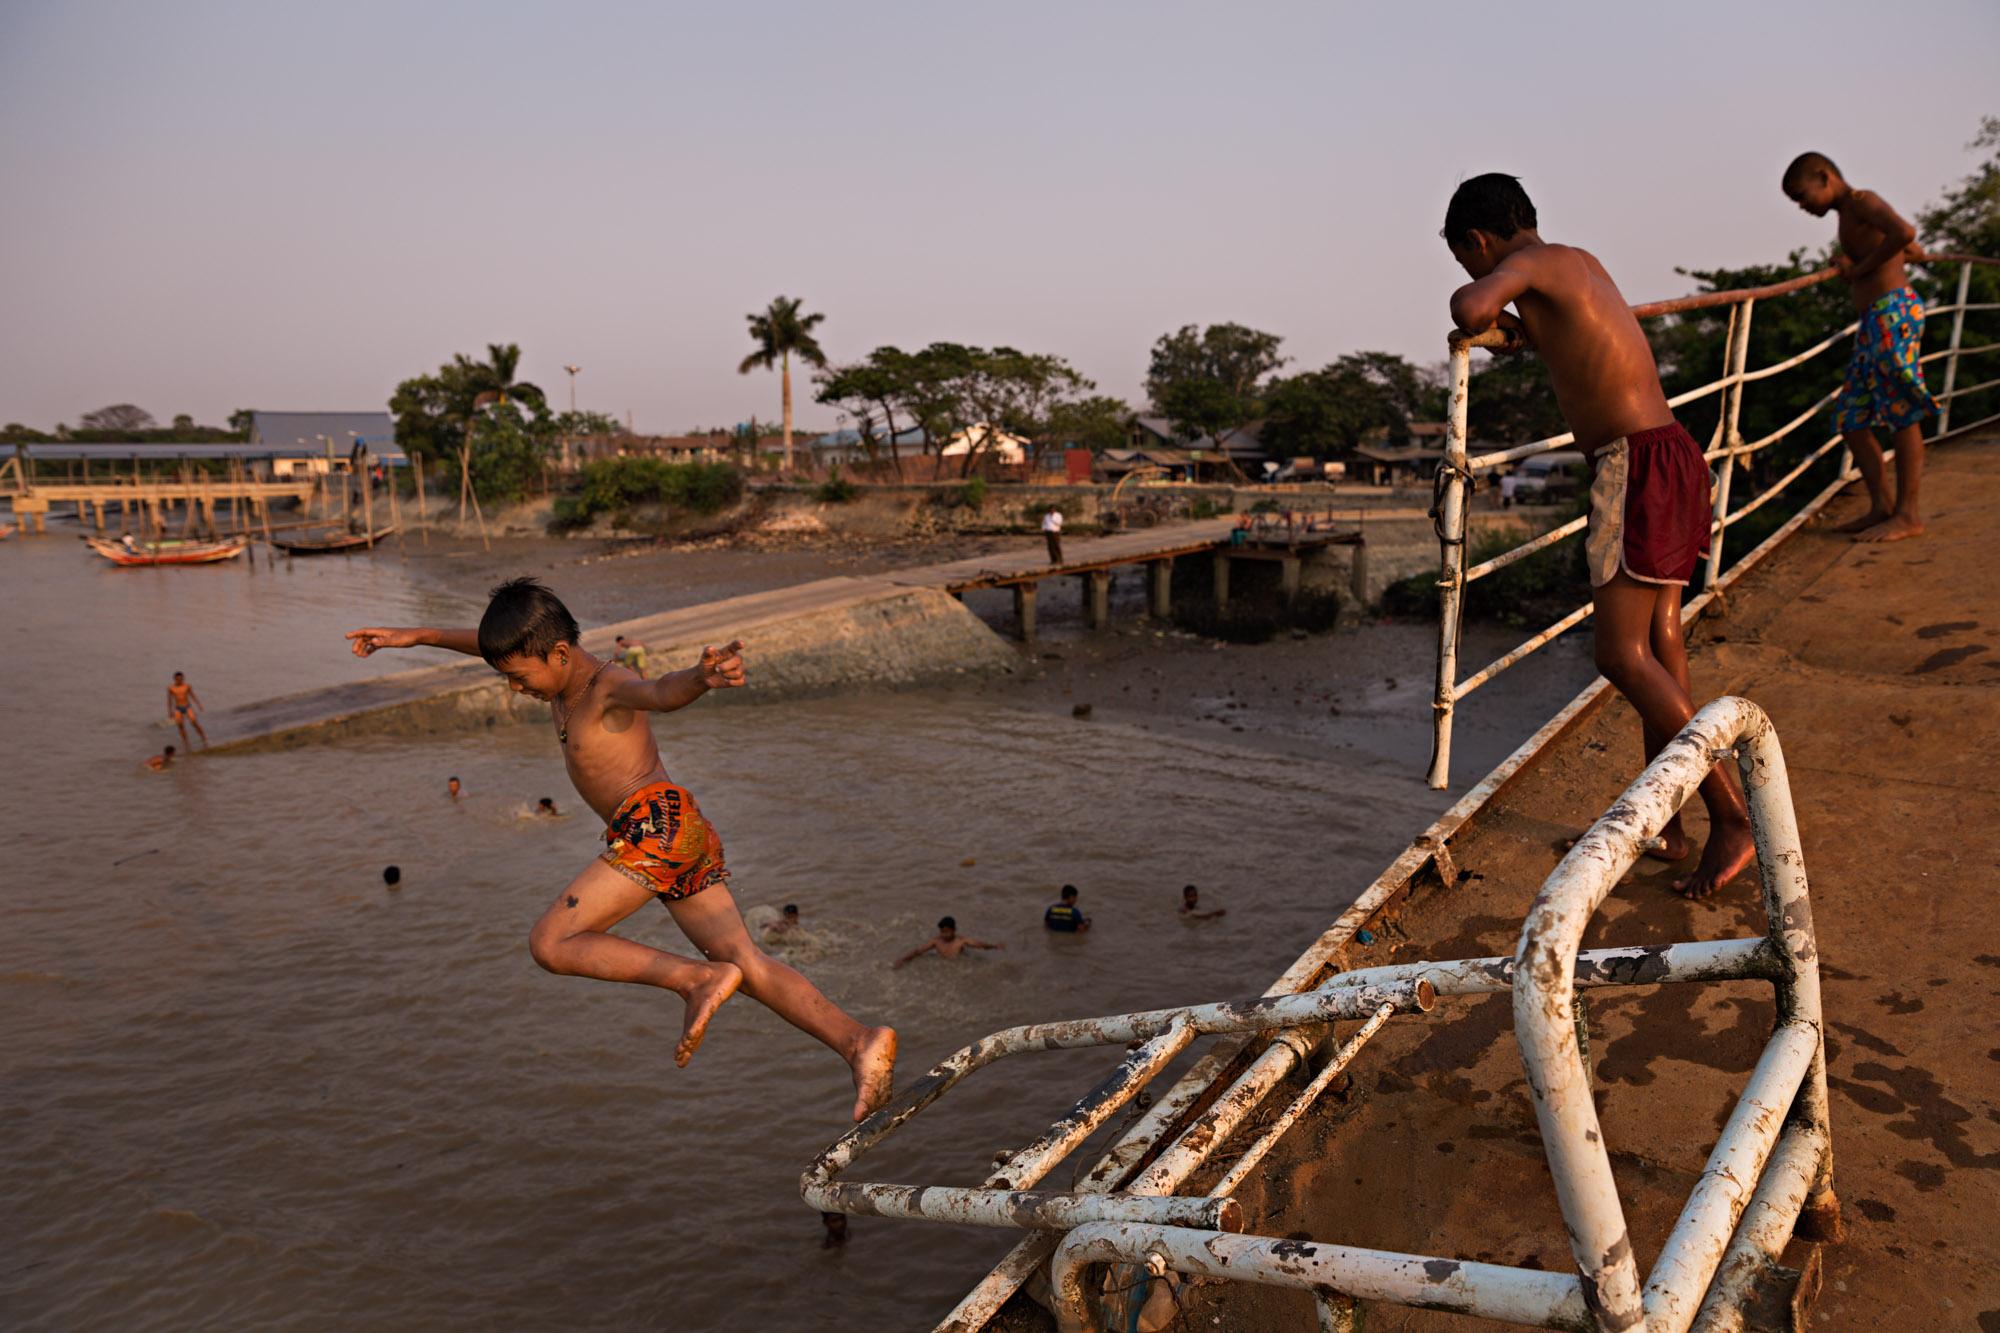 Travel - Boys jump into the Yangon river from an abandoned ferry...